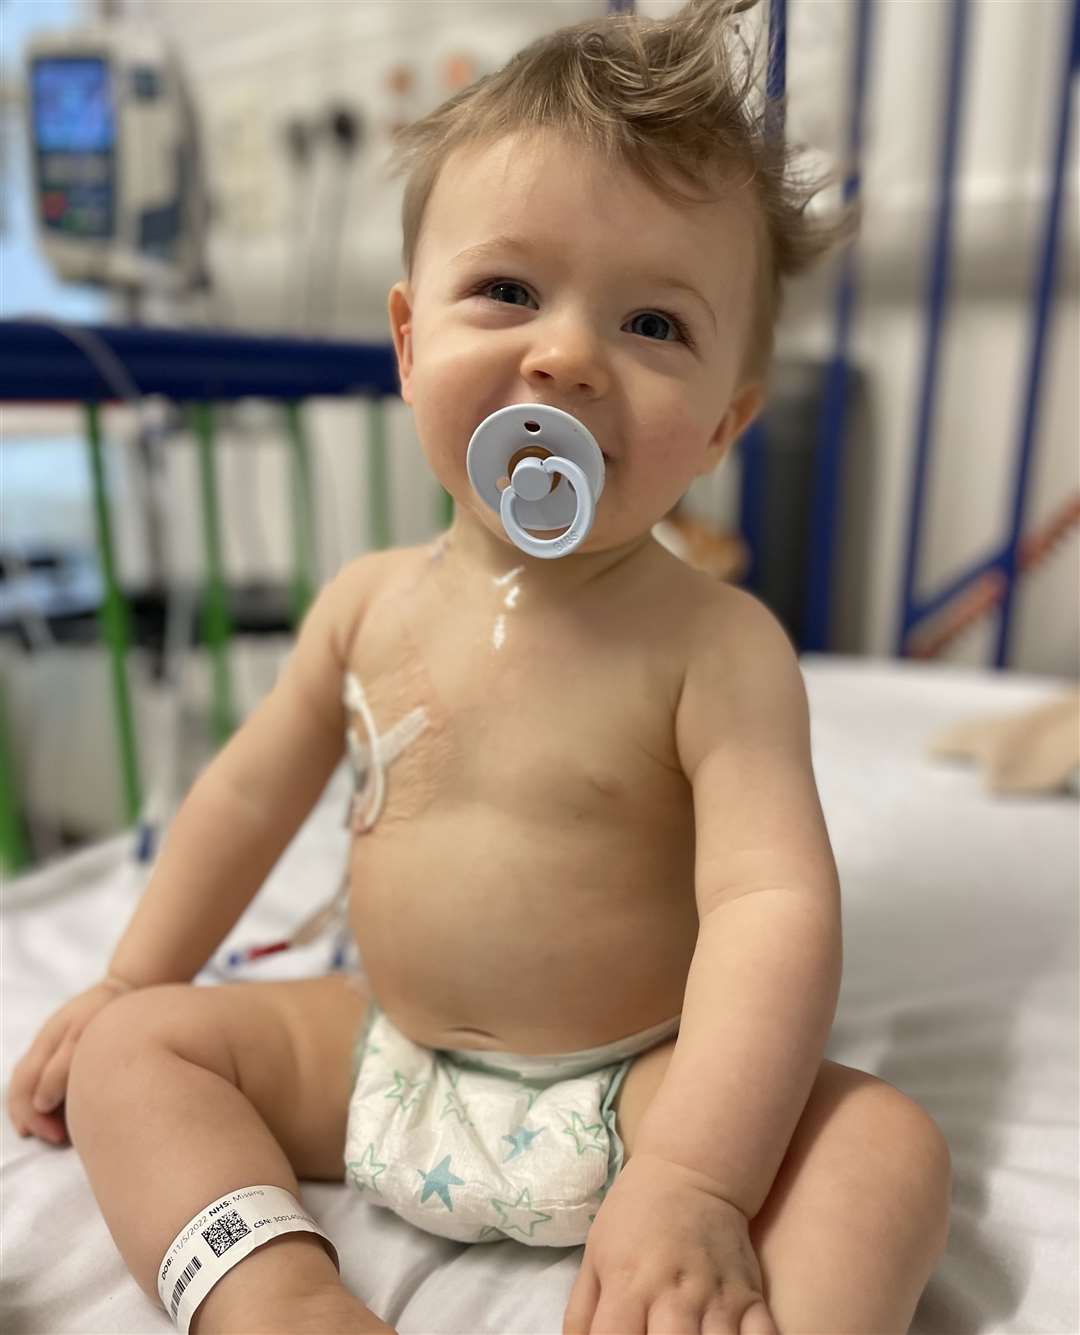 Teddy Bridge is keeping happy while undergoing treatment for an aggressive form of leukaemia at Great Ormond Street Hospital for Children in London